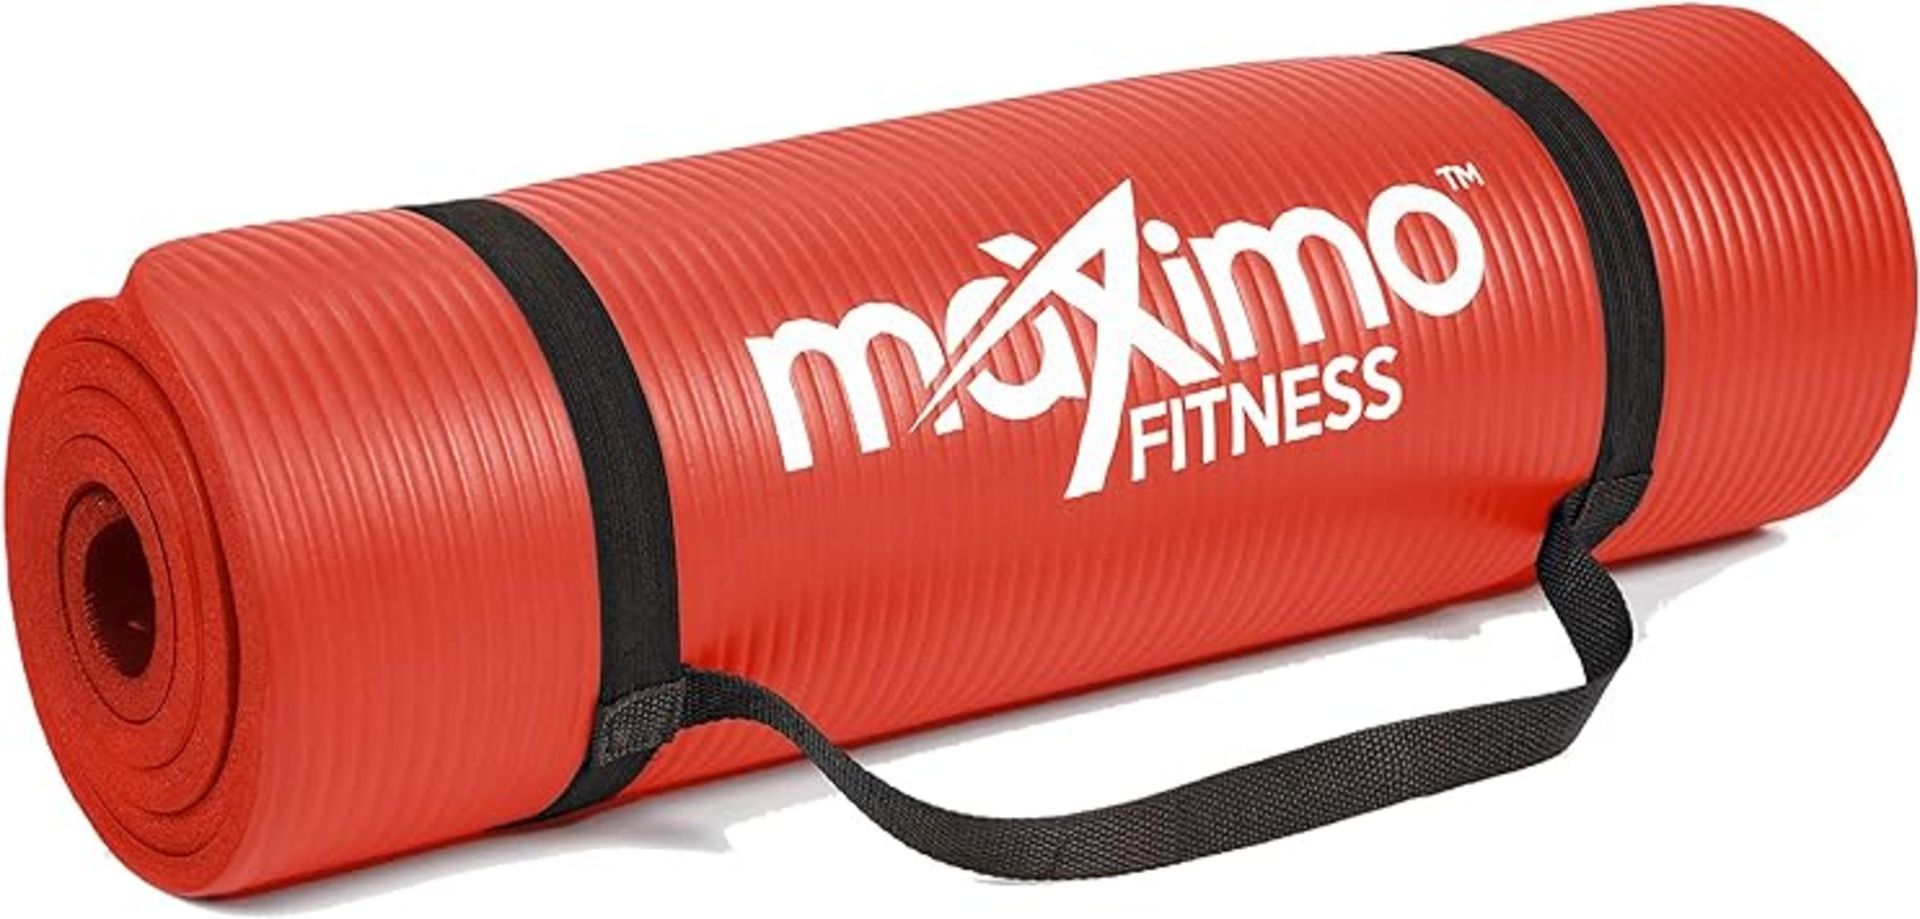 Pallet of Exercise Mats (Red)